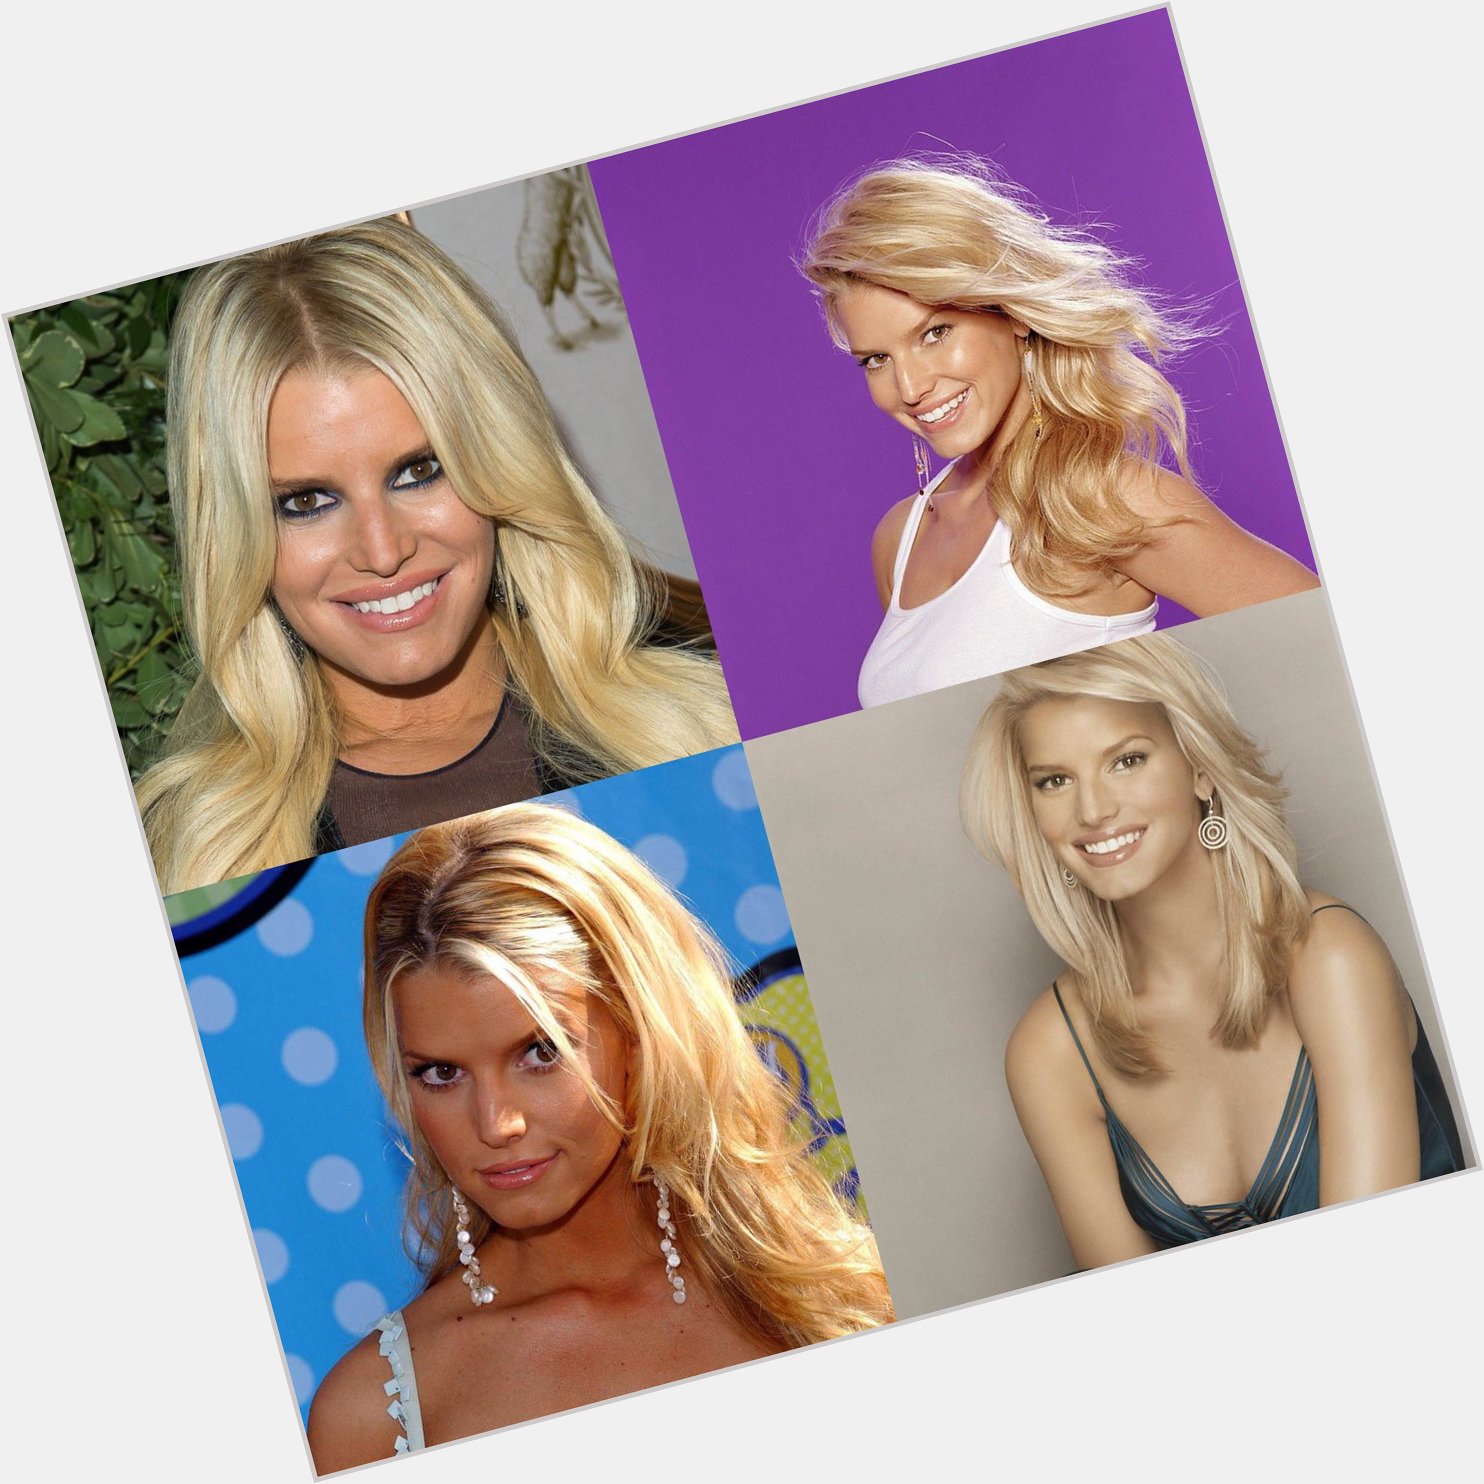 Happy 38 to Jessica Simpson. Hope that she has a wonderful birthday.     